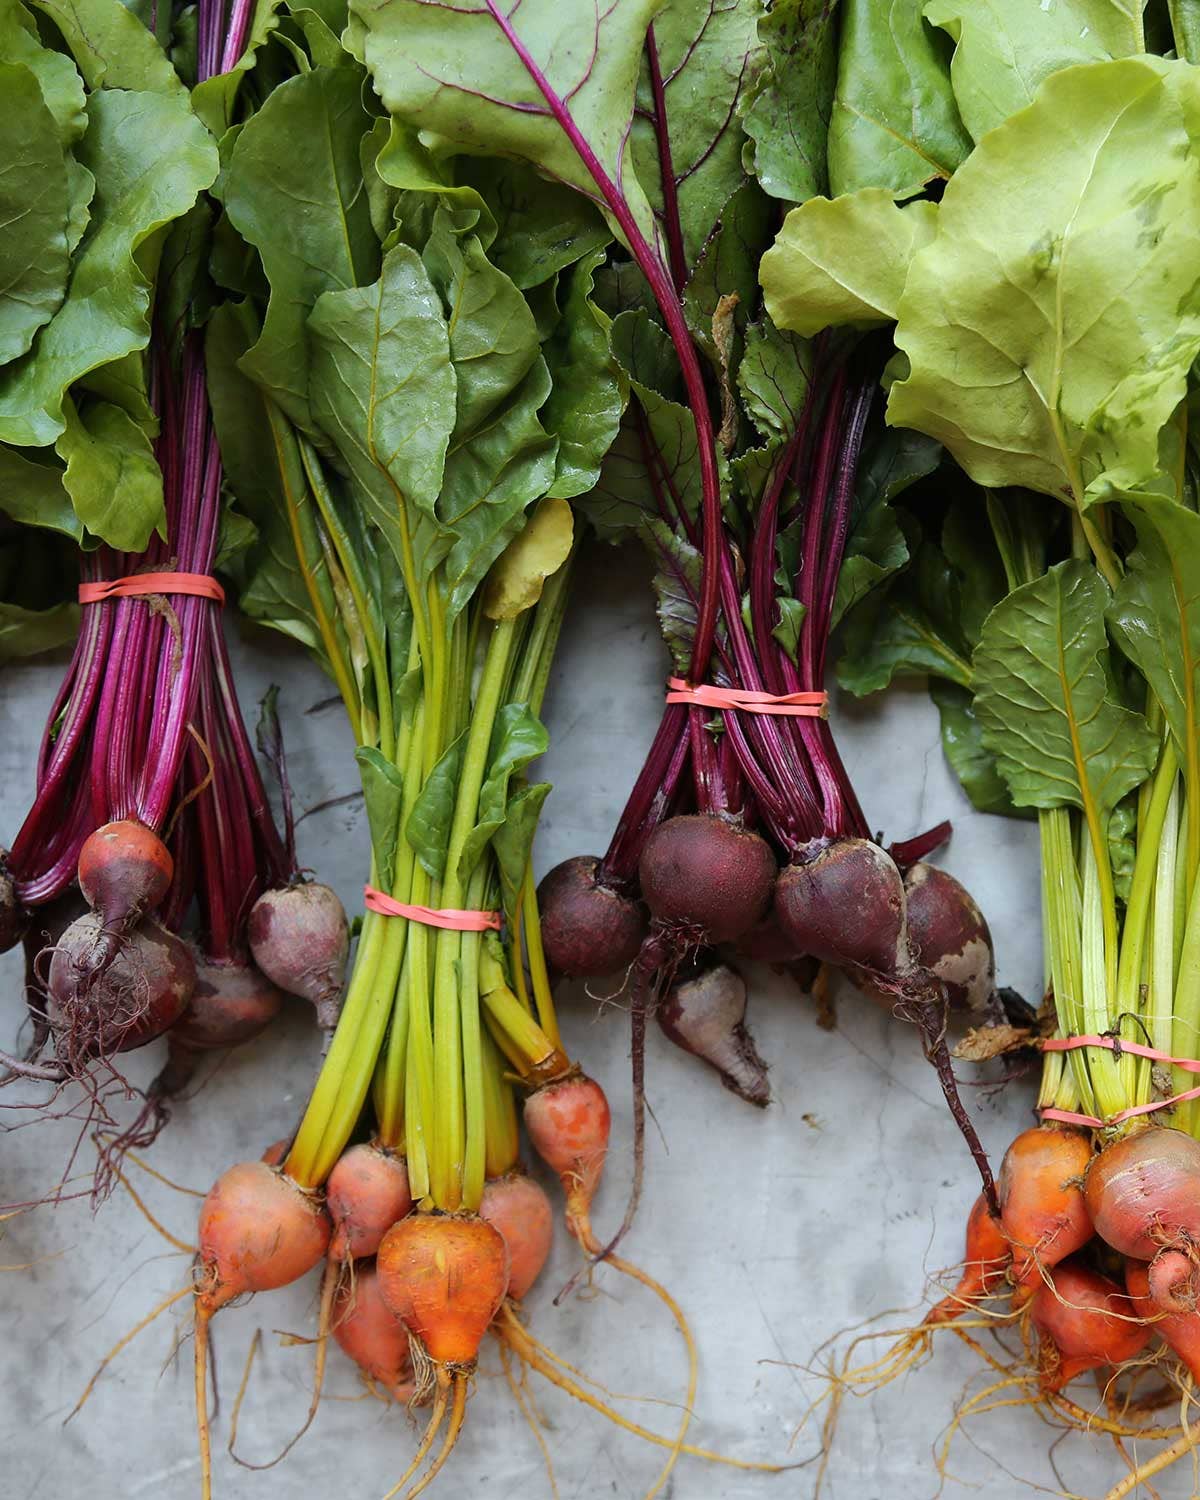 Beet-Haters: Spring Beets May Change Your Mind